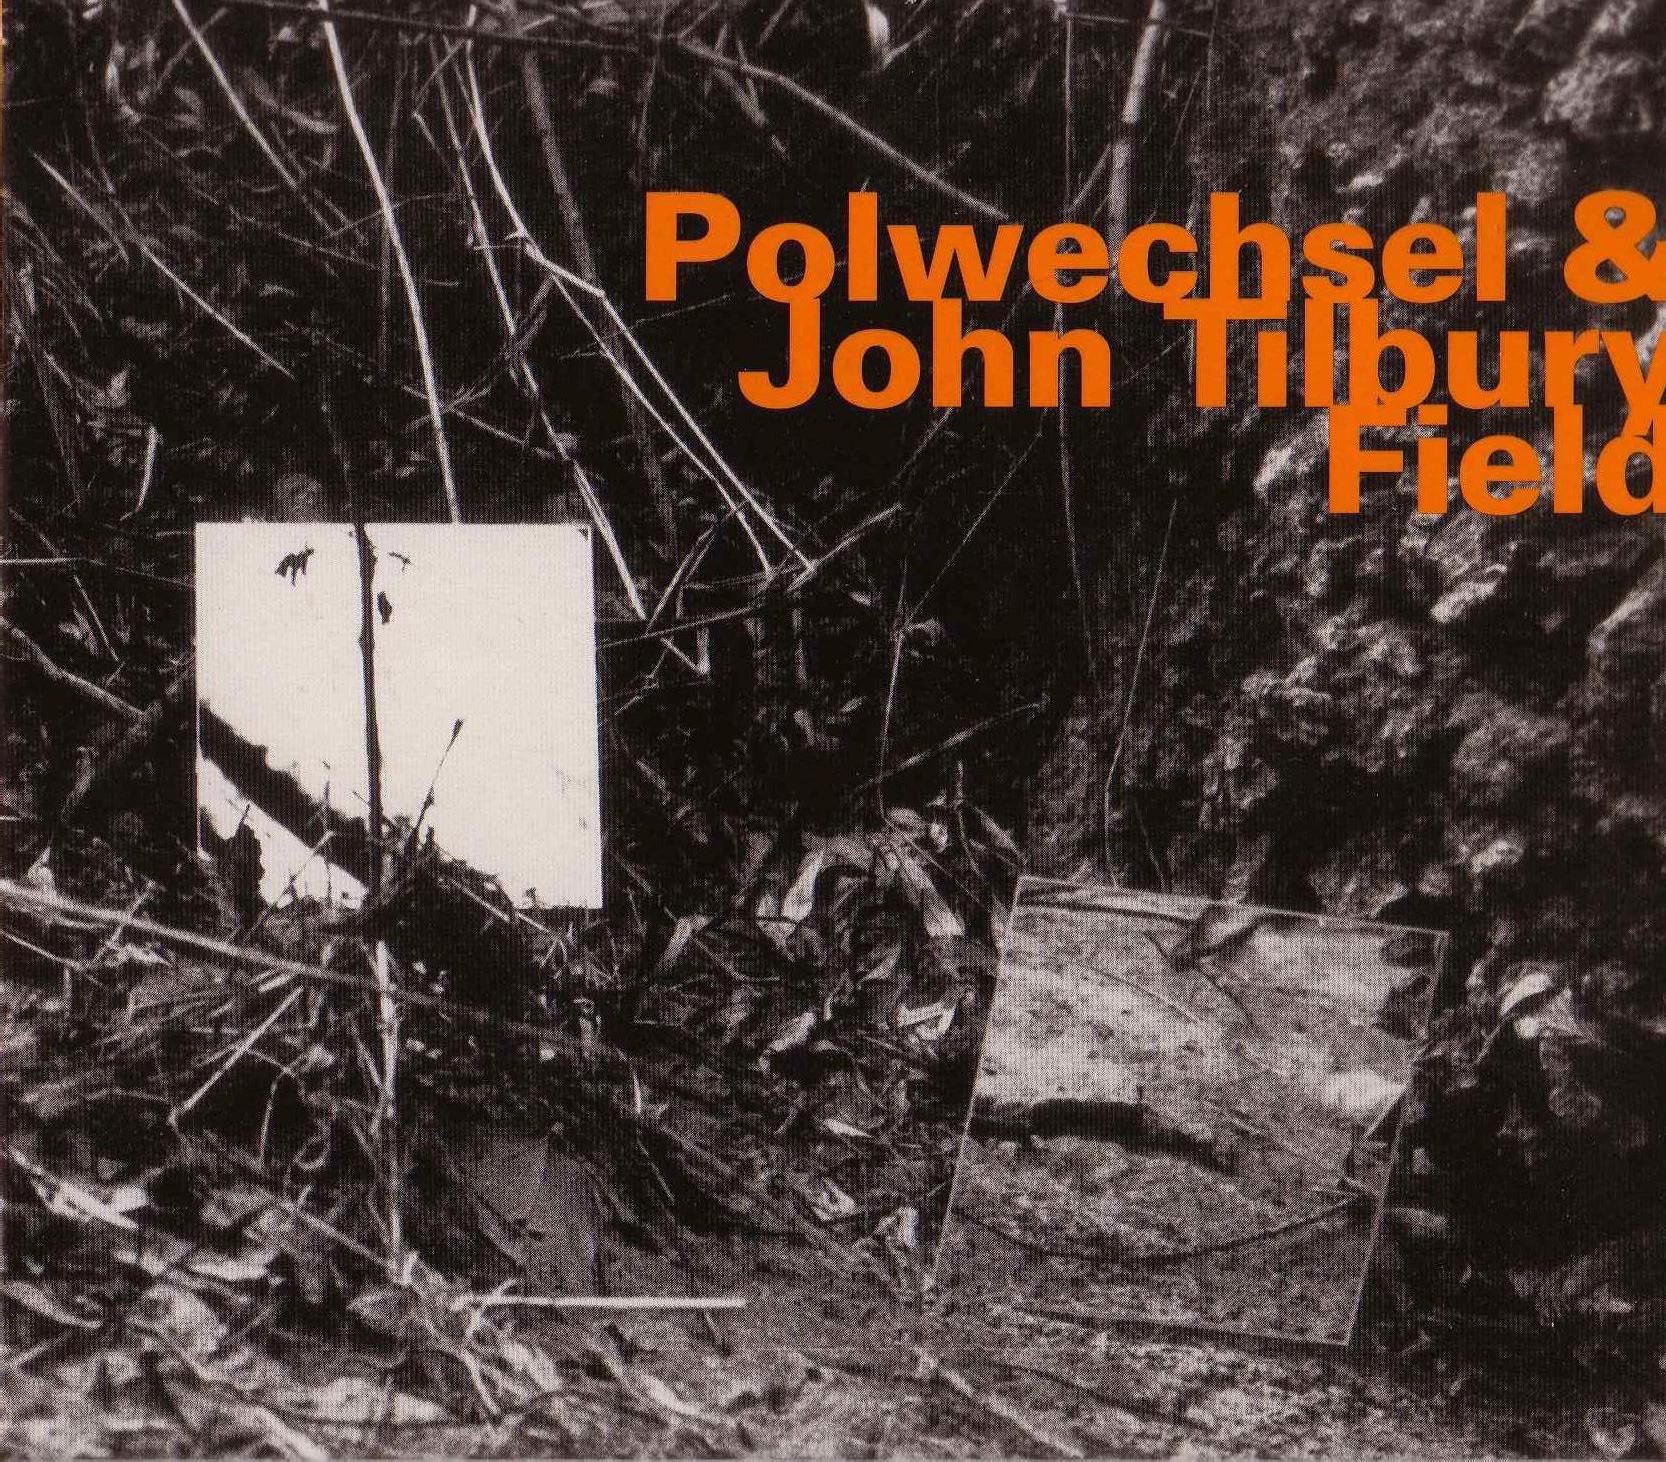 POLWECHSEL: FIELD - CoverBack